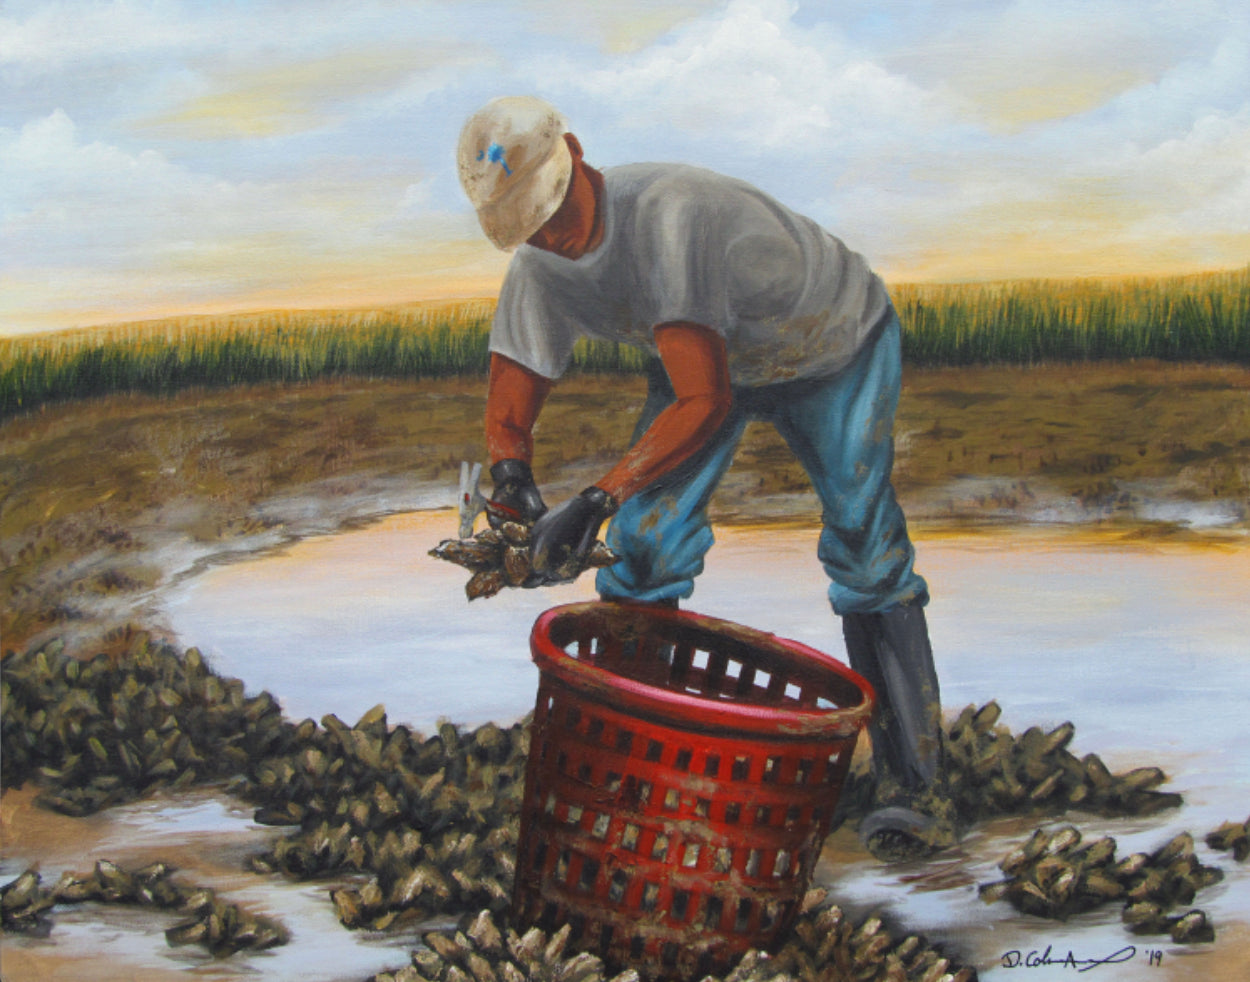 “Oyster Diggin’” by Dana Coleman